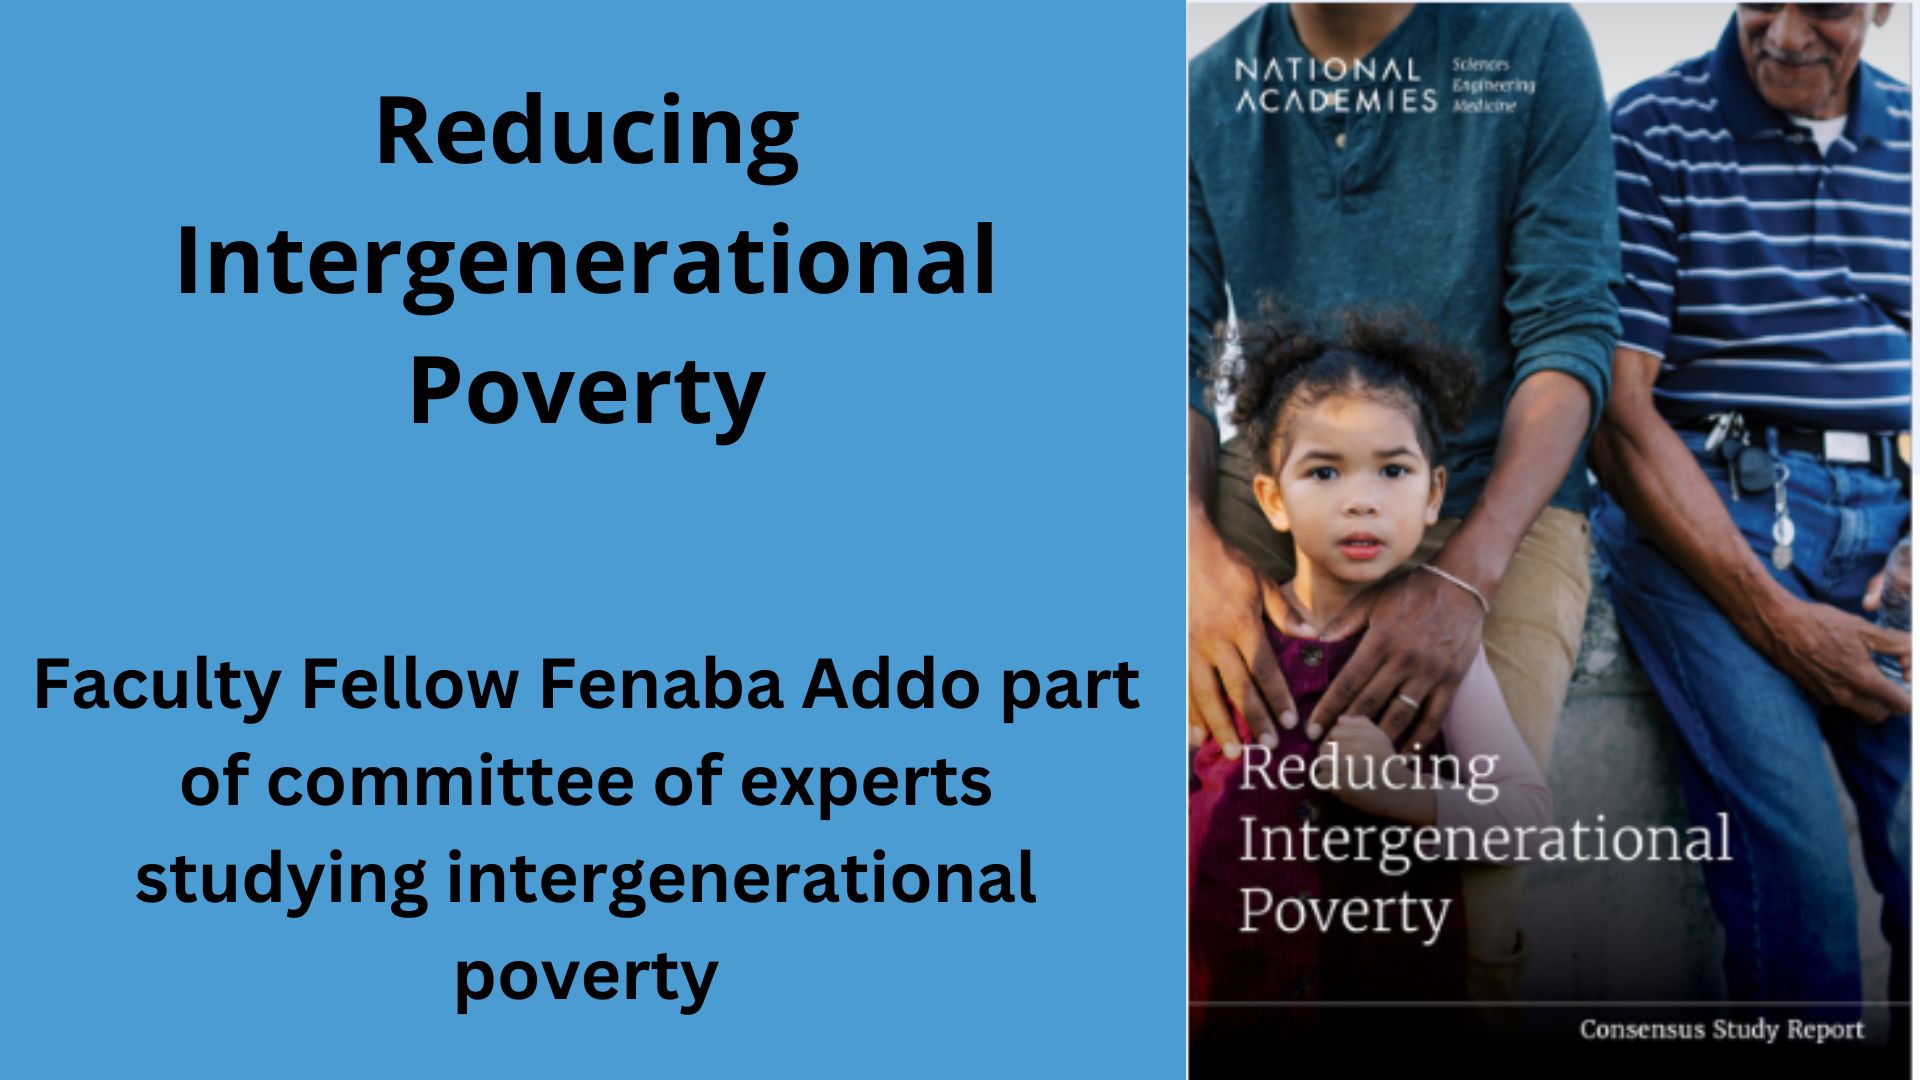 Reducing Intergenerational Poverty